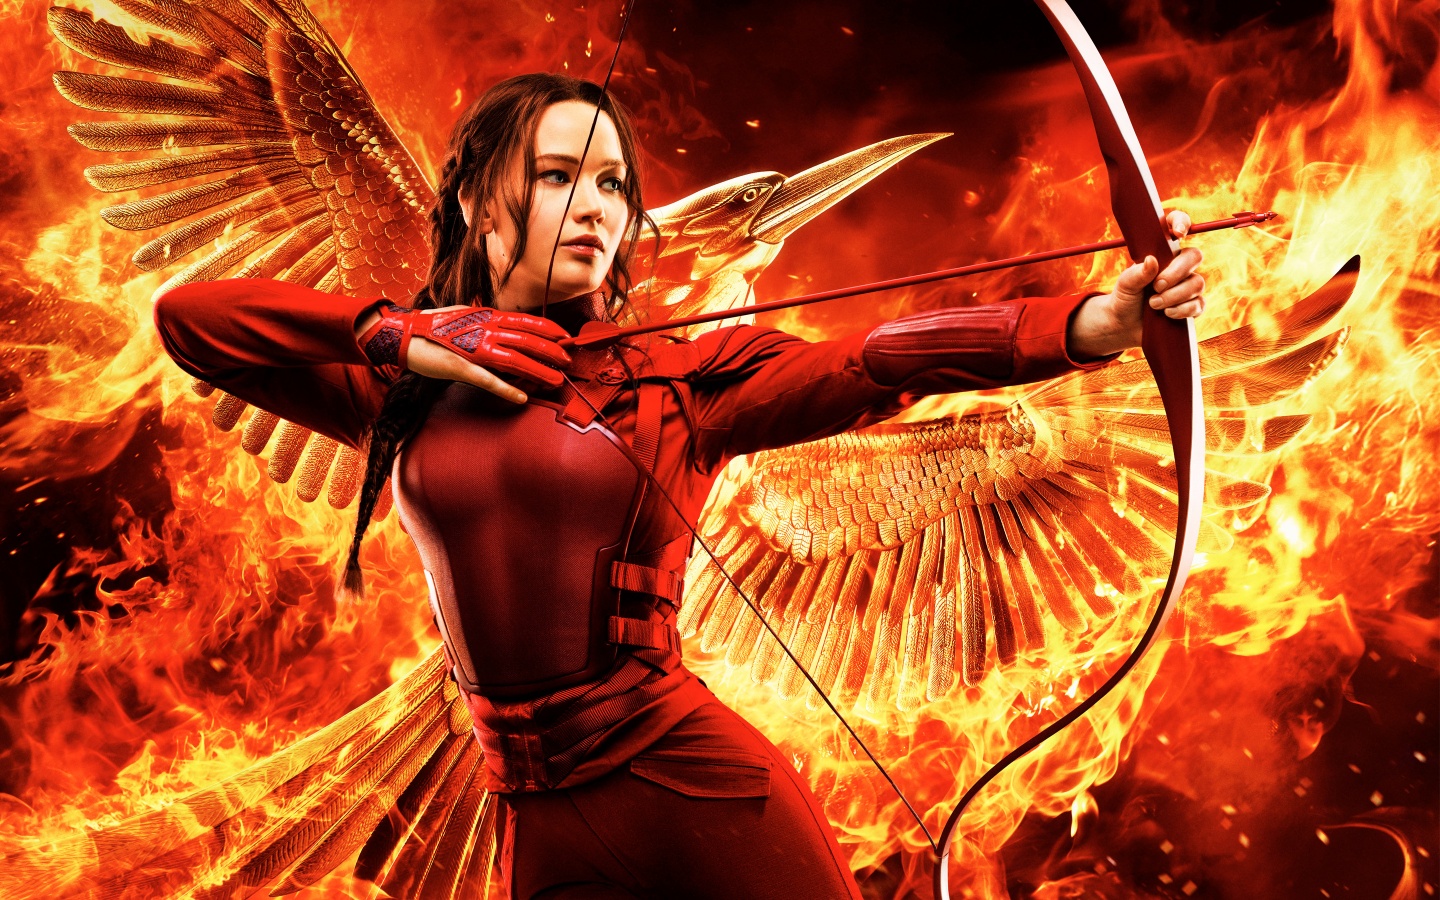 The Hunger Games - Mockingjay (Part 2)